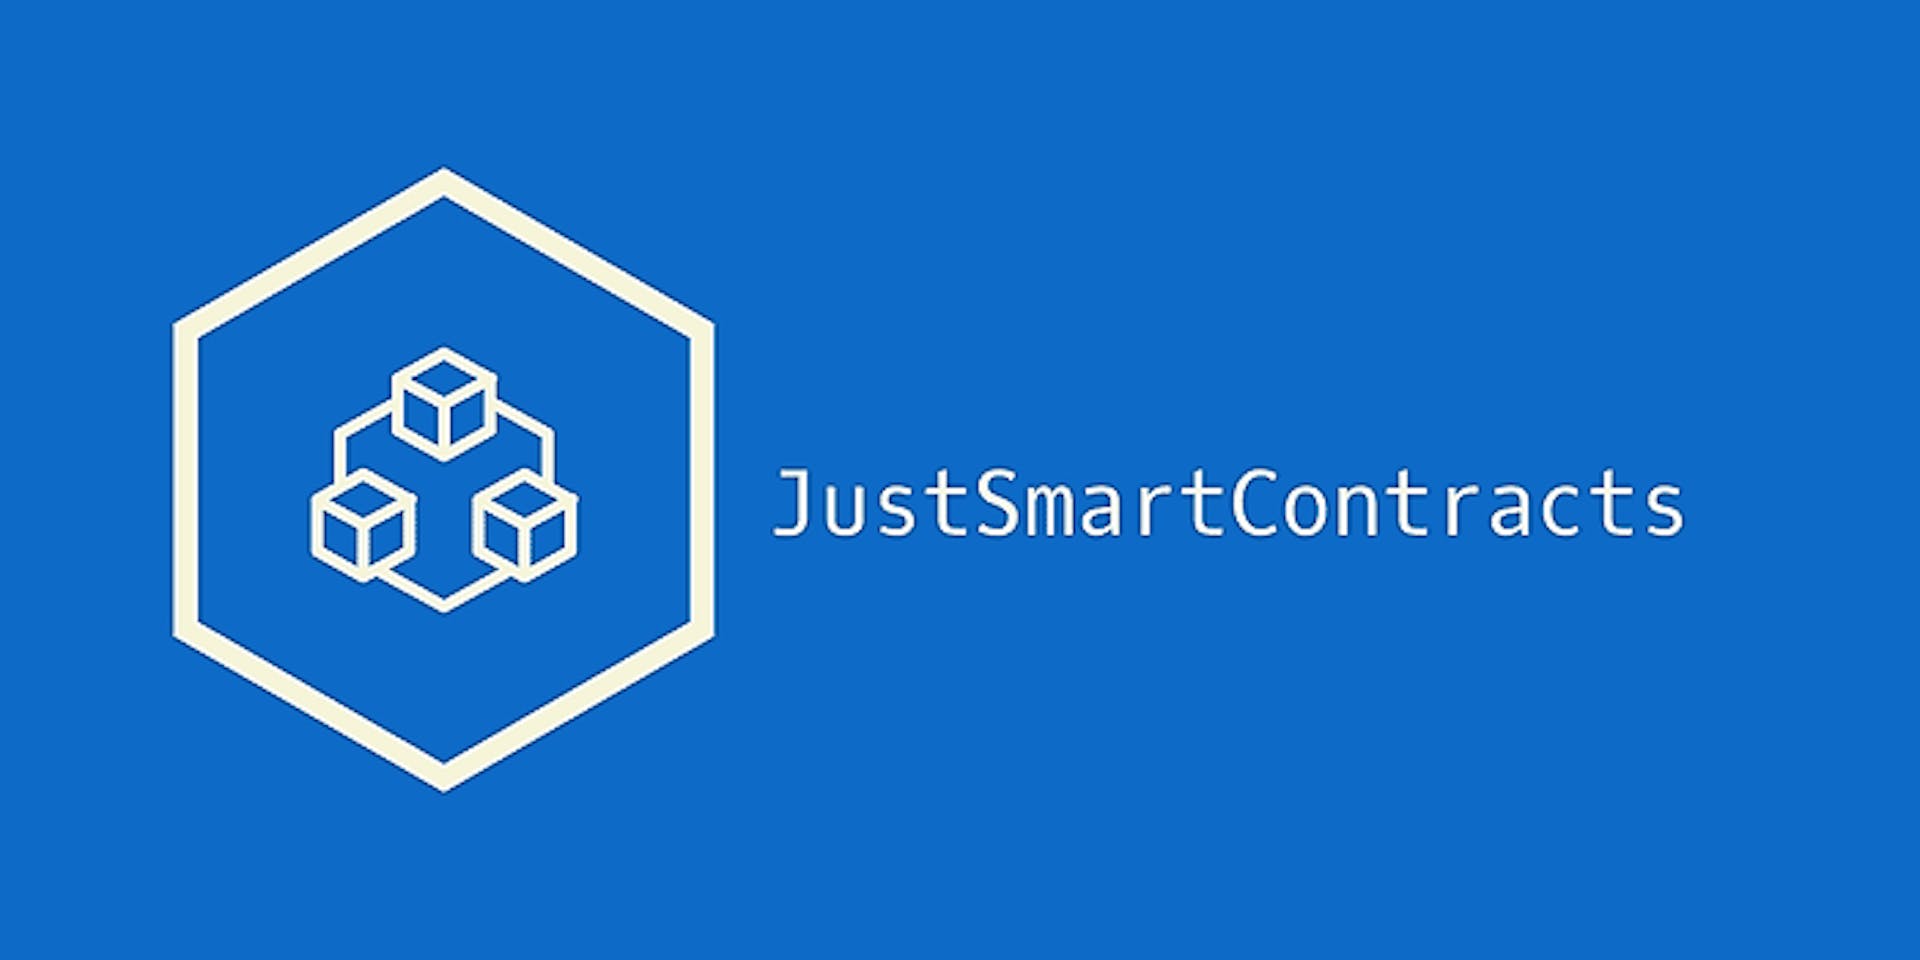 featured image - New web tool for interacting with Ethereum smart contracts